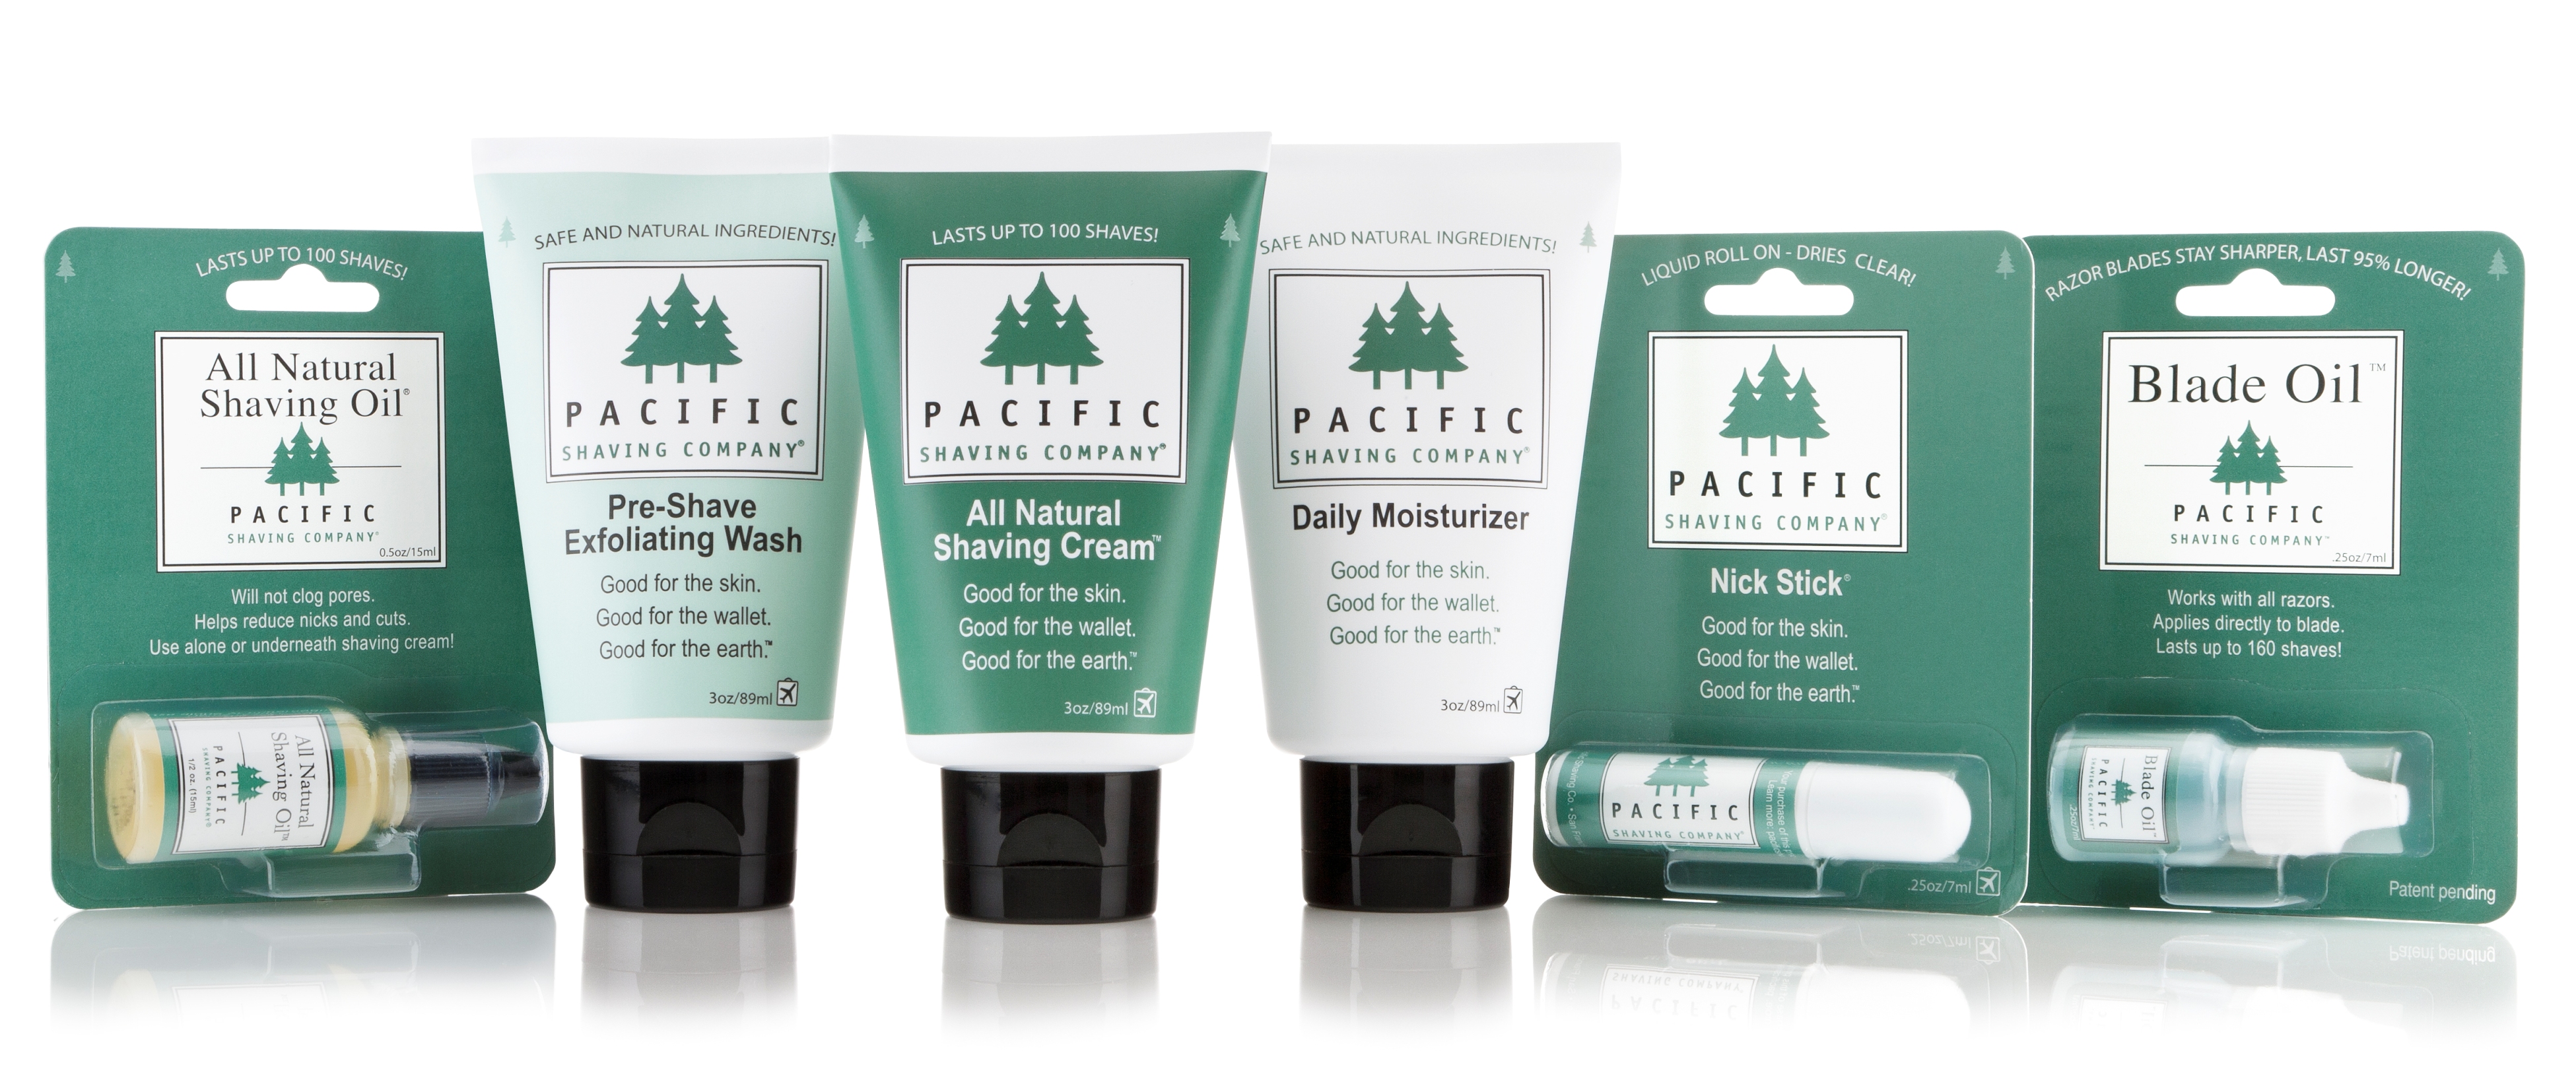 Pacific Shaving Company's line of natural, safe and eco-friendly shaving essentials.